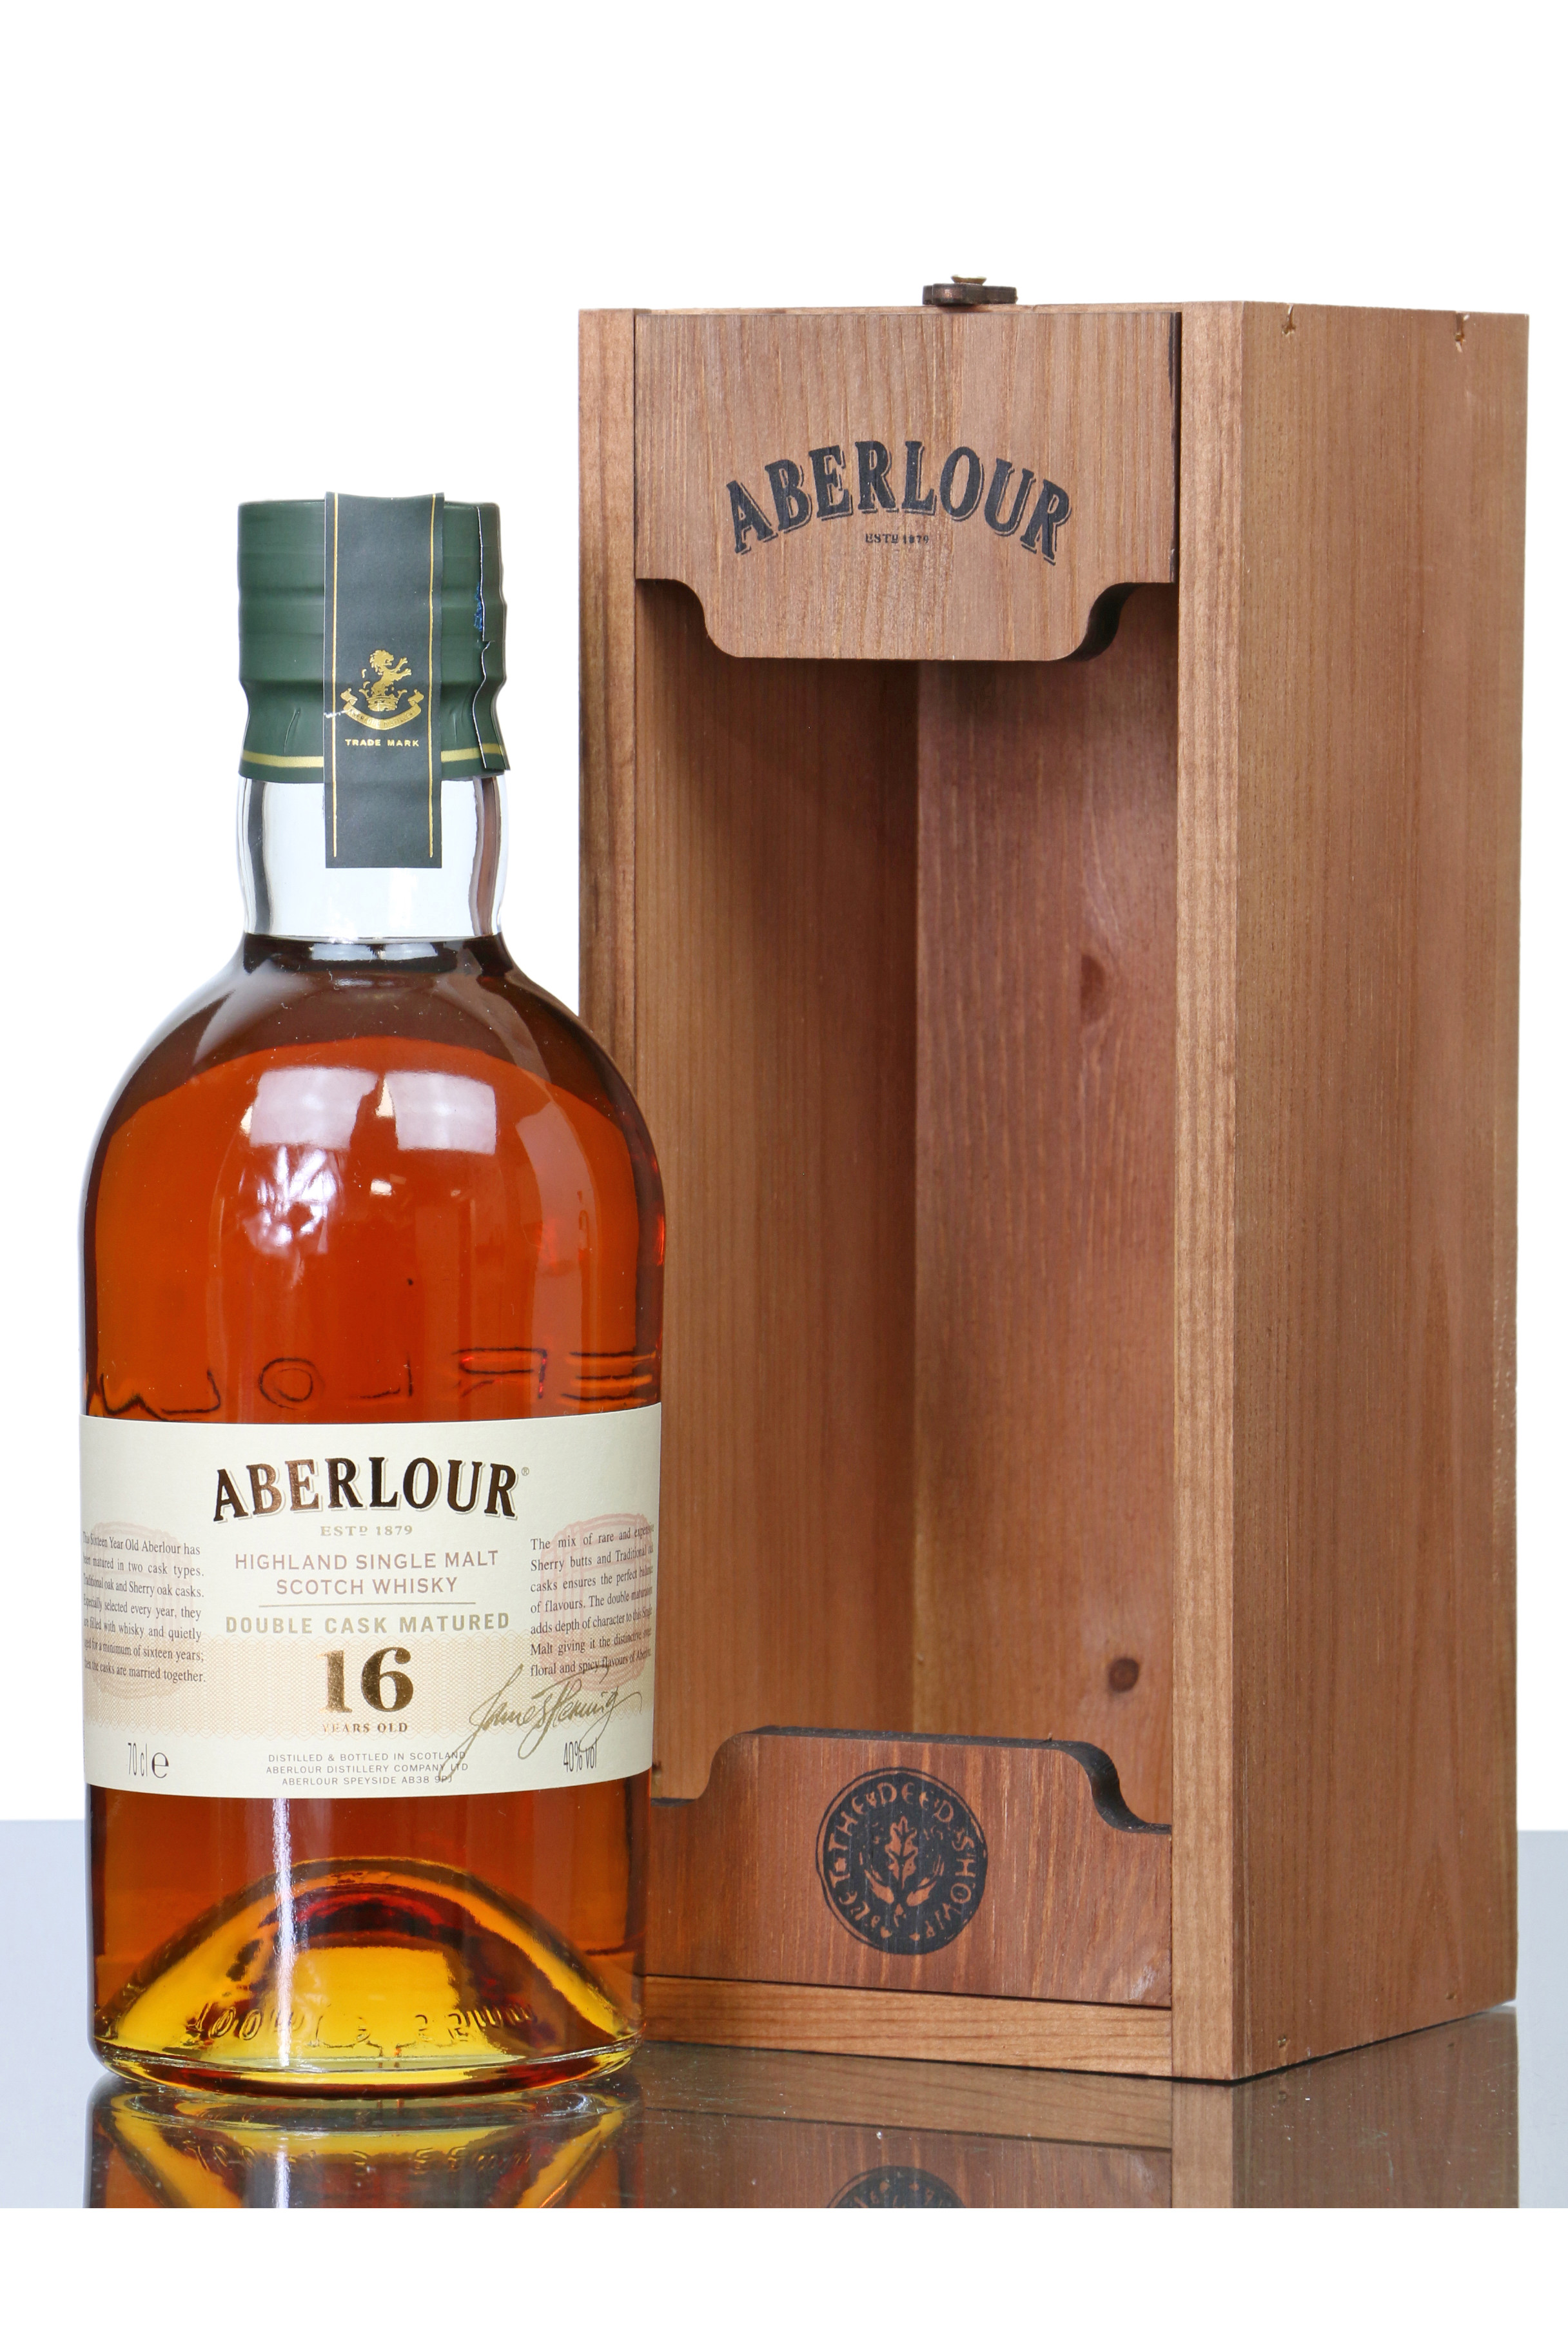 Aberlour library. Виски Аберлауэр 16. Aberlour 16 Double Cask. Виски Aberlour 10 лет. Double Whisky in Hungary.